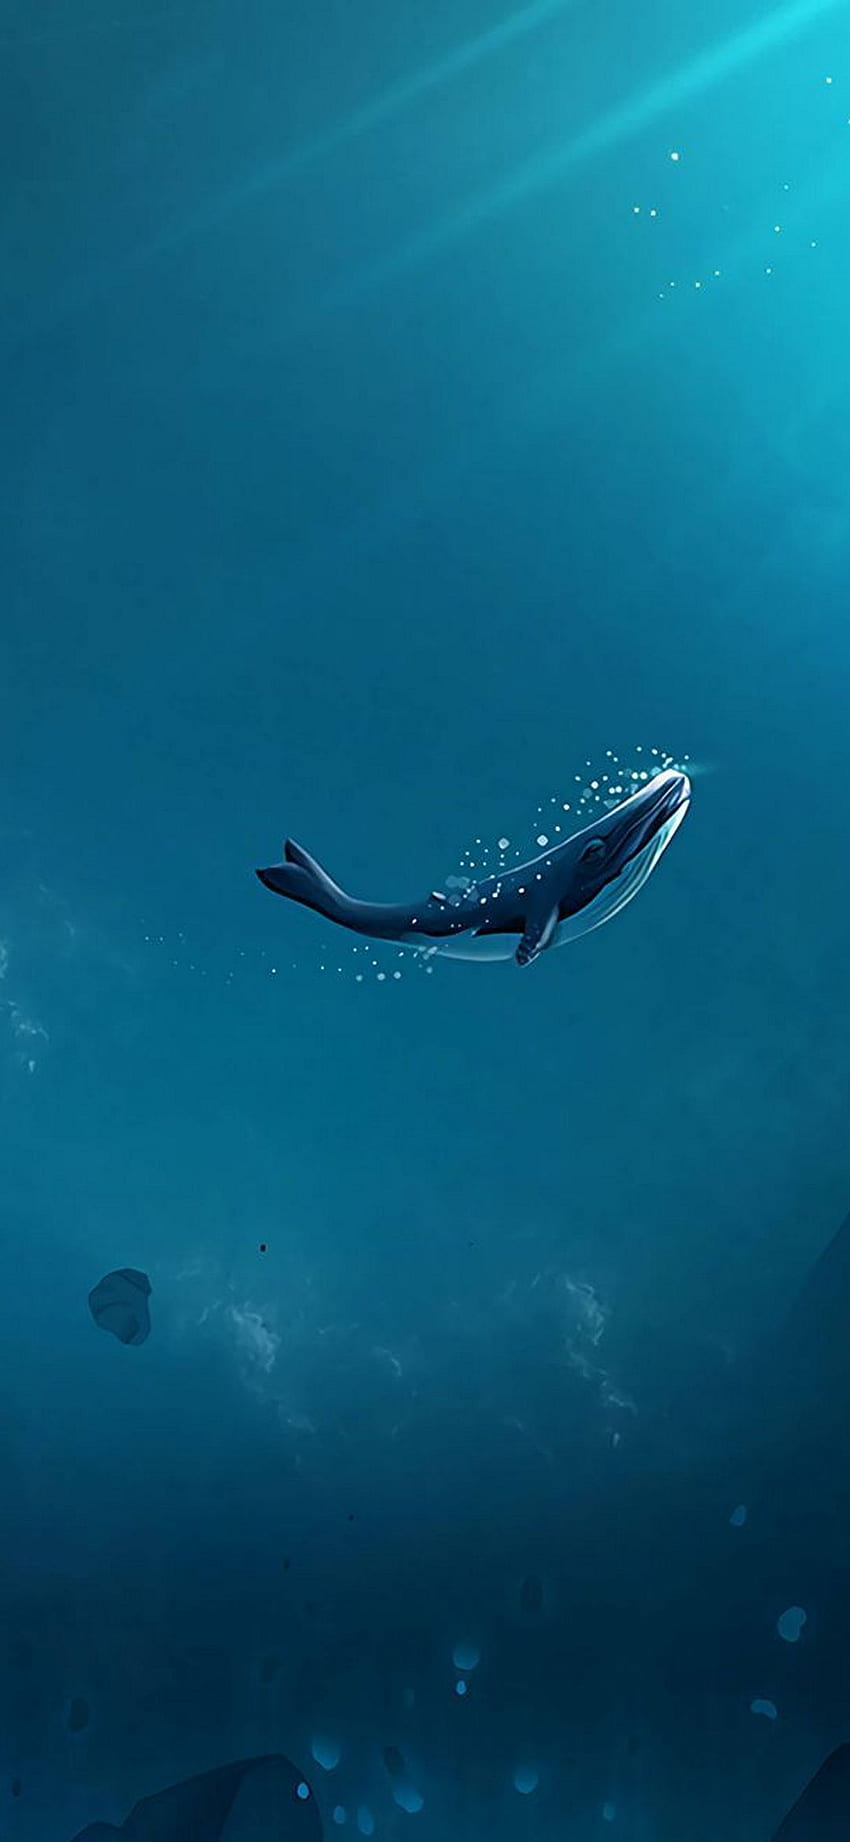 10 Whale Shark HD Wallpapers and Backgrounds